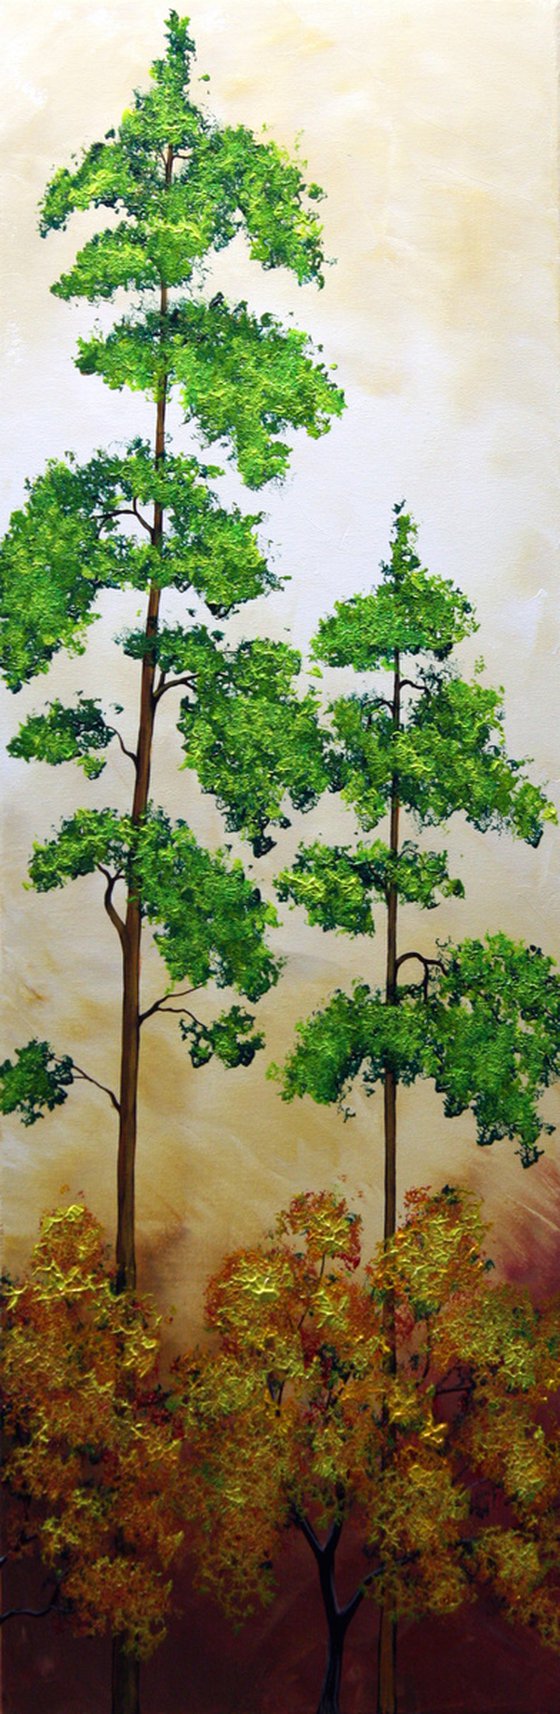 "The Pine Trees" Painting